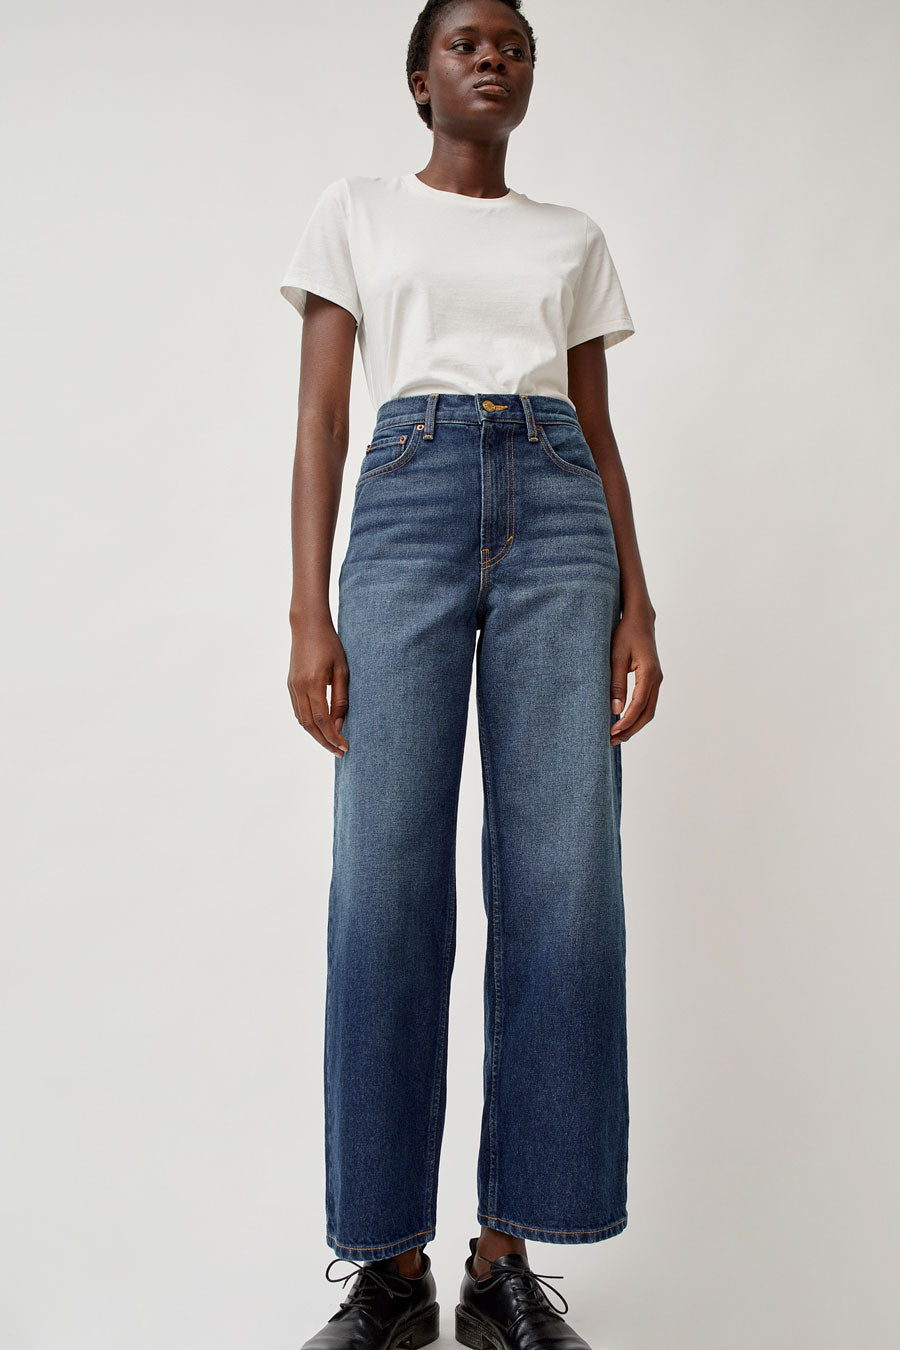 B Sides Elissa High Wide Jean in Cate Wash